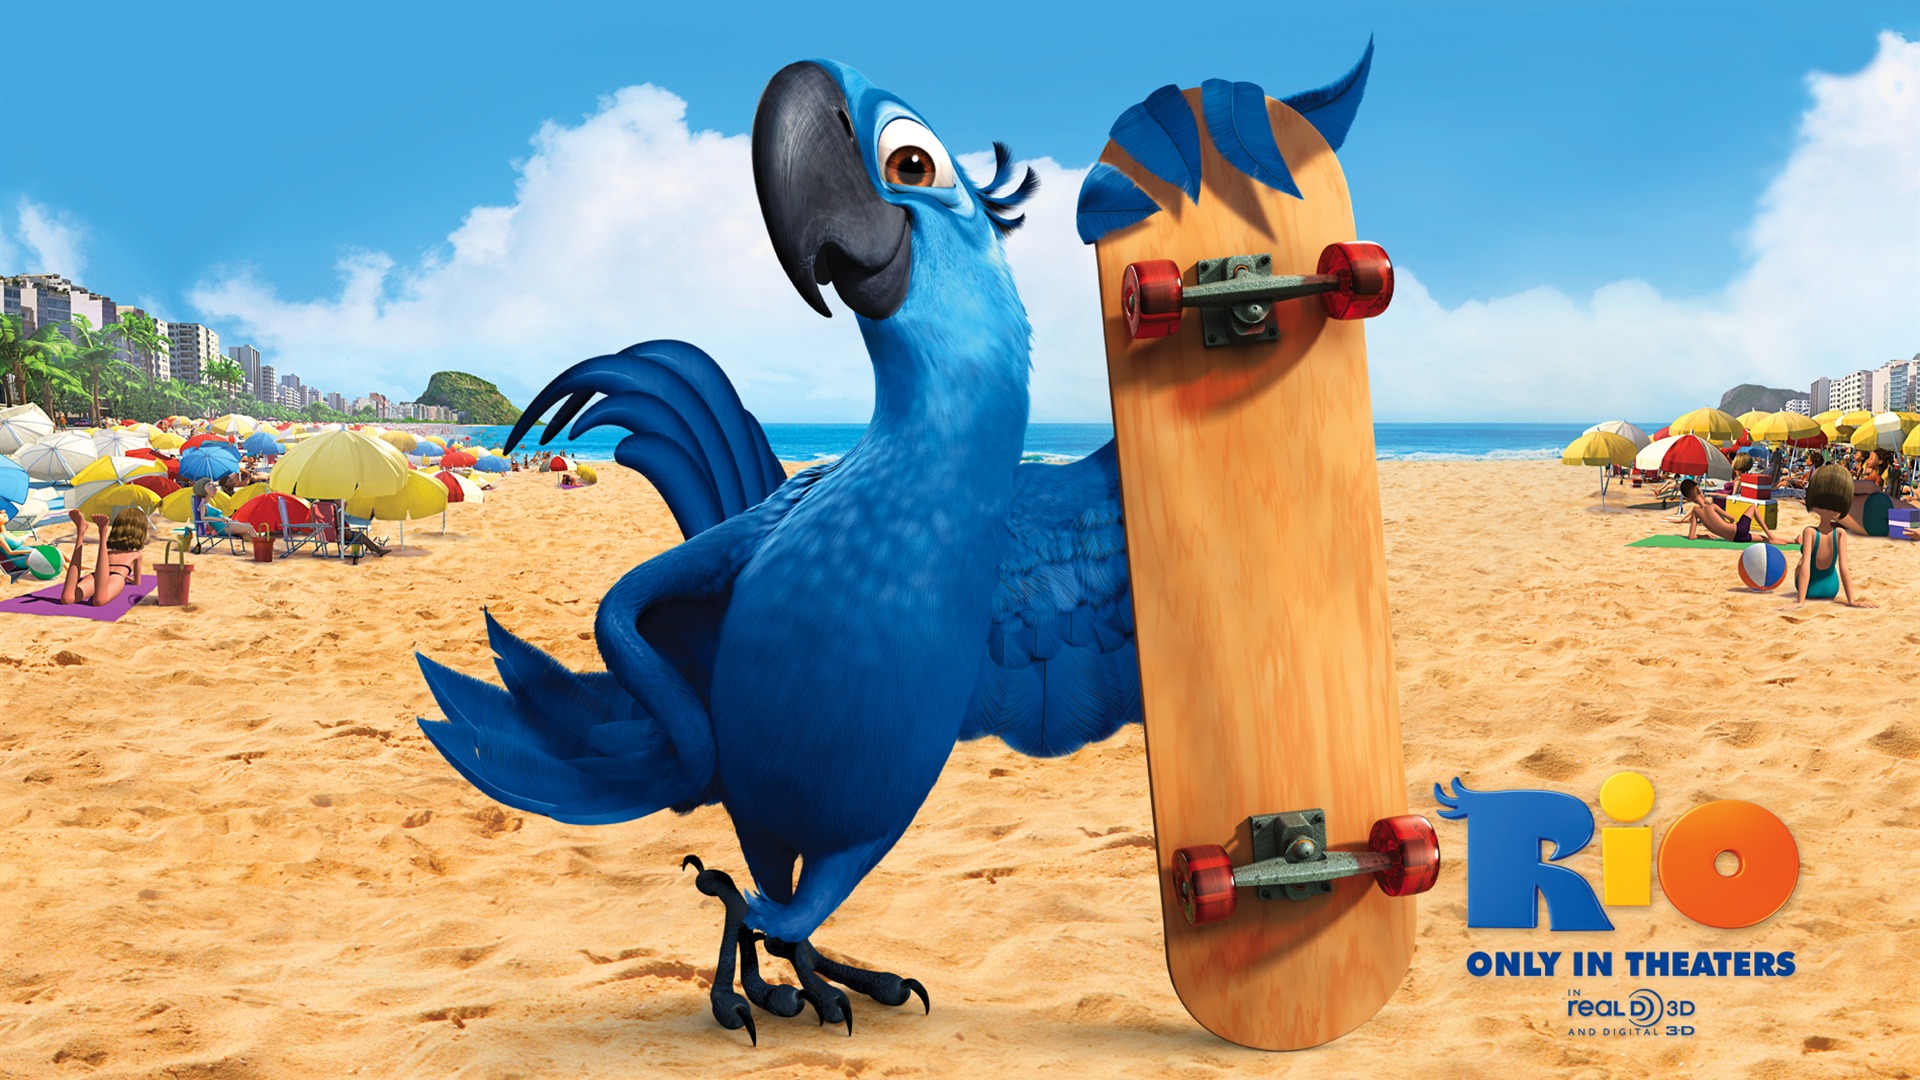 Rio 2011 wallpapers #3 - 1920x1080